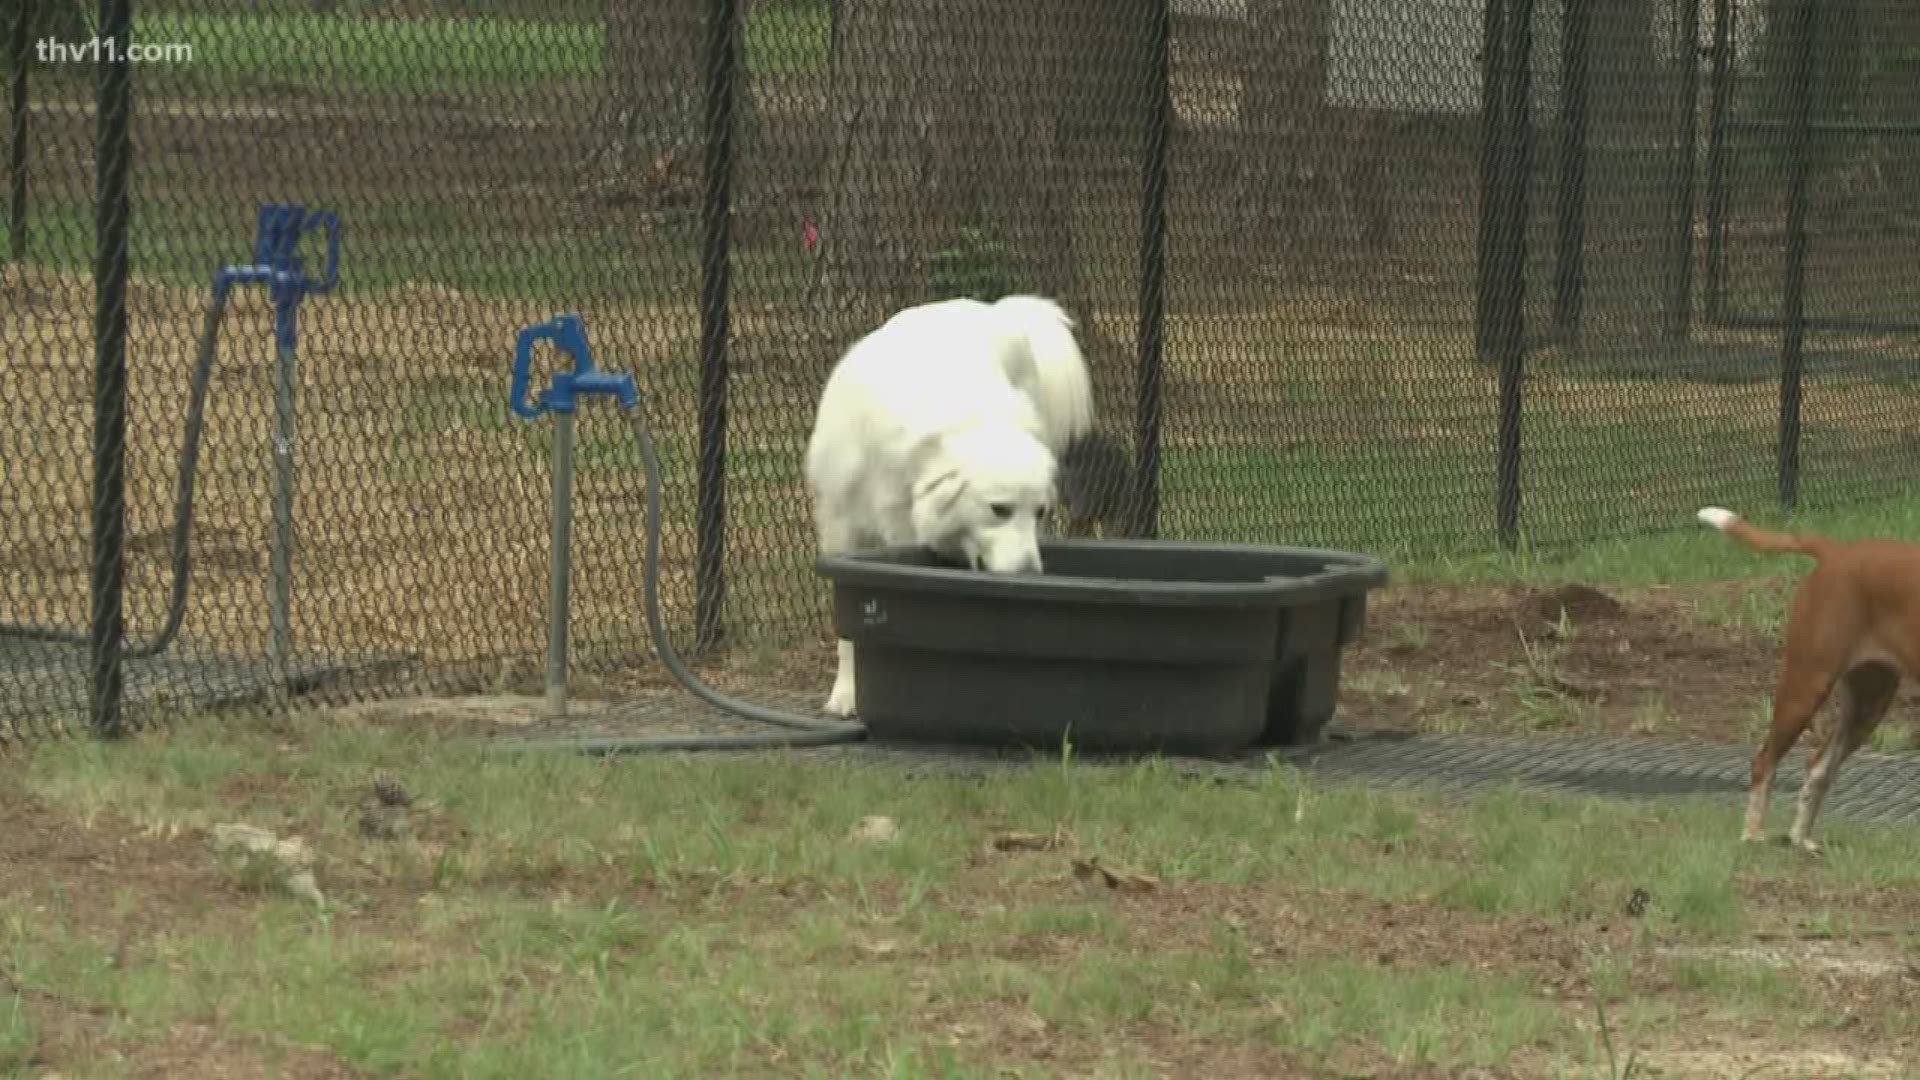 North Little Rock Parks and Recreation opened the city's newest dog park, with the apt name "Barks and Rec."